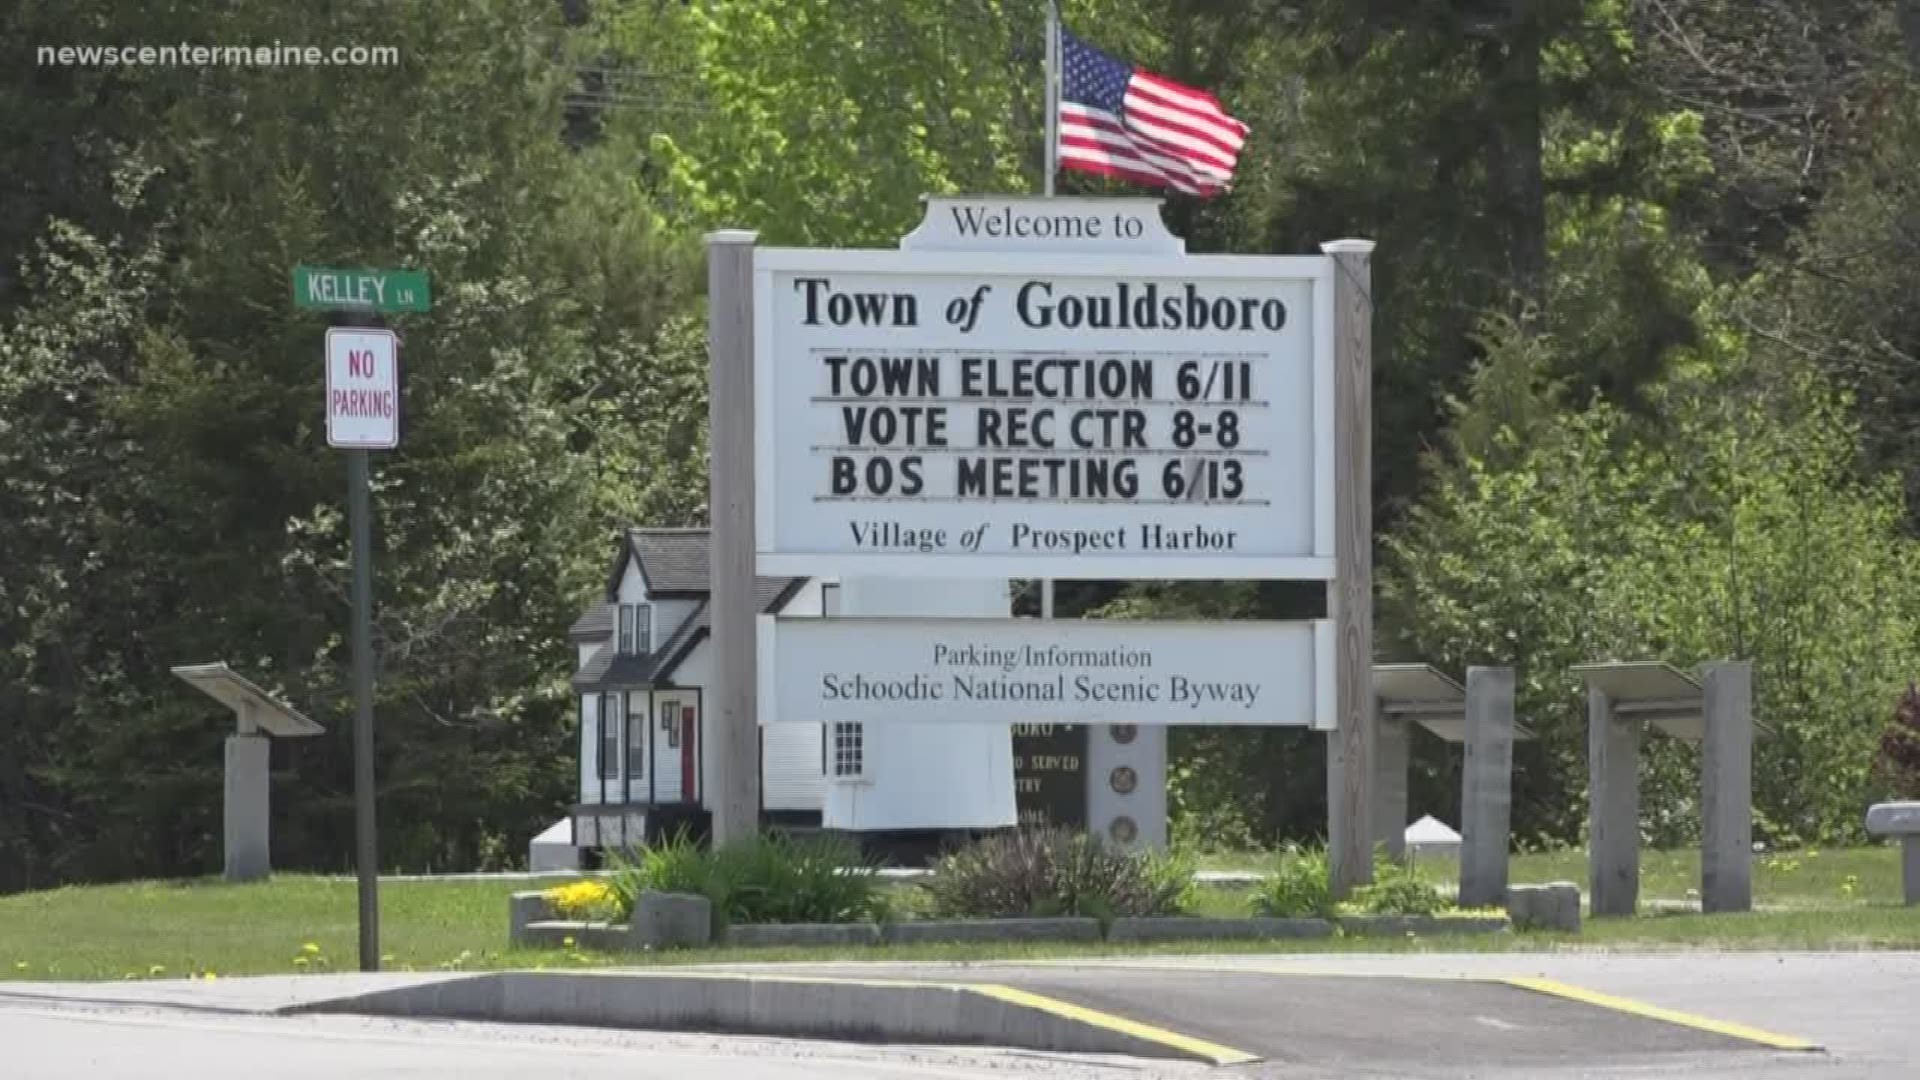 The Gouldsboro community will vote on whether to disband the town's police department on Tuesday, June 11.